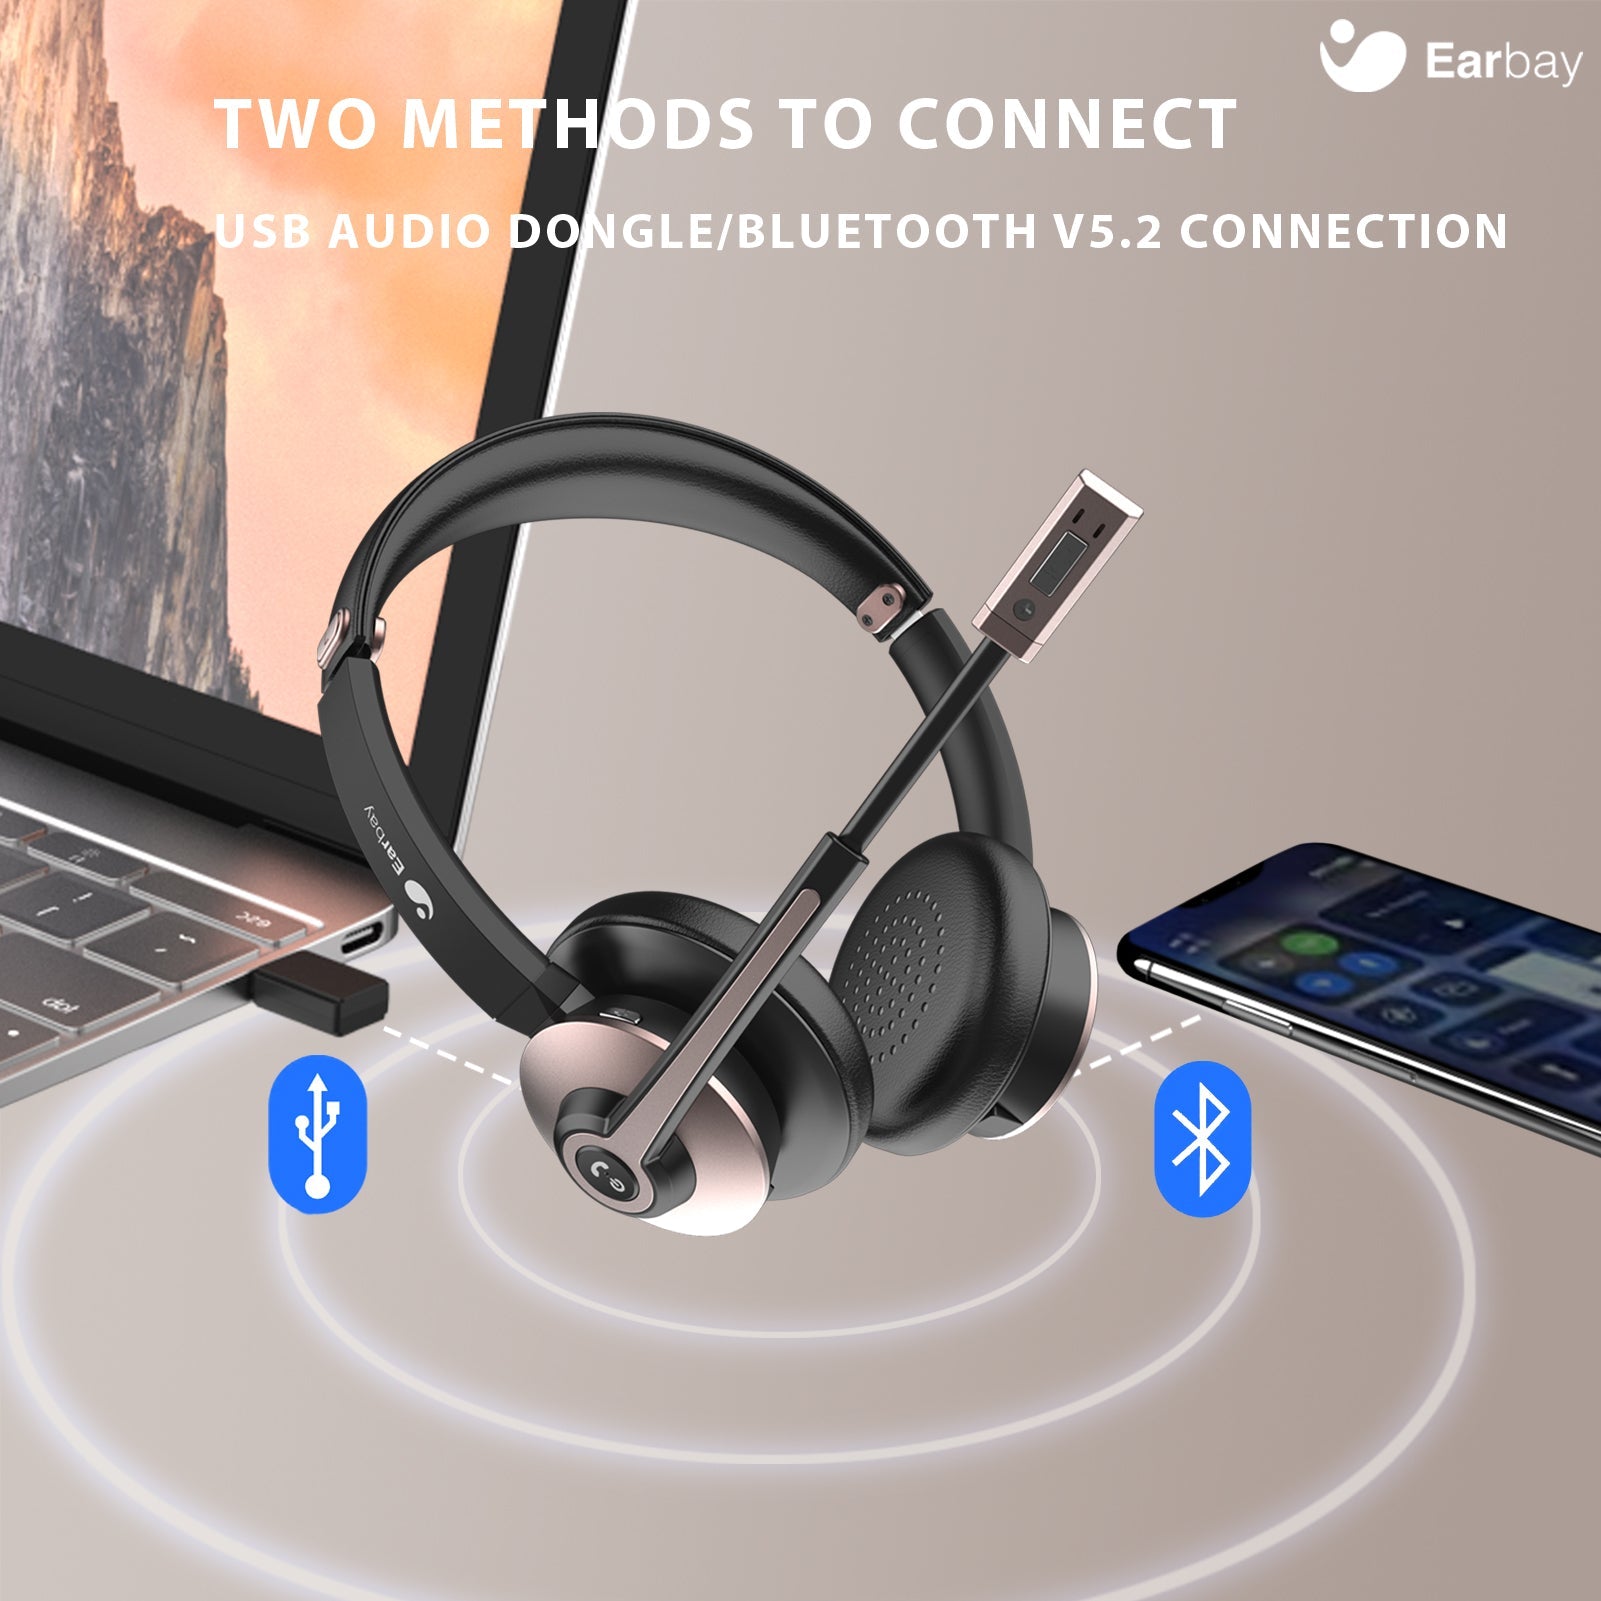 Earbay Rose Gold Bluetooth Headset with Microphone, USB Dongle BT782G-DG